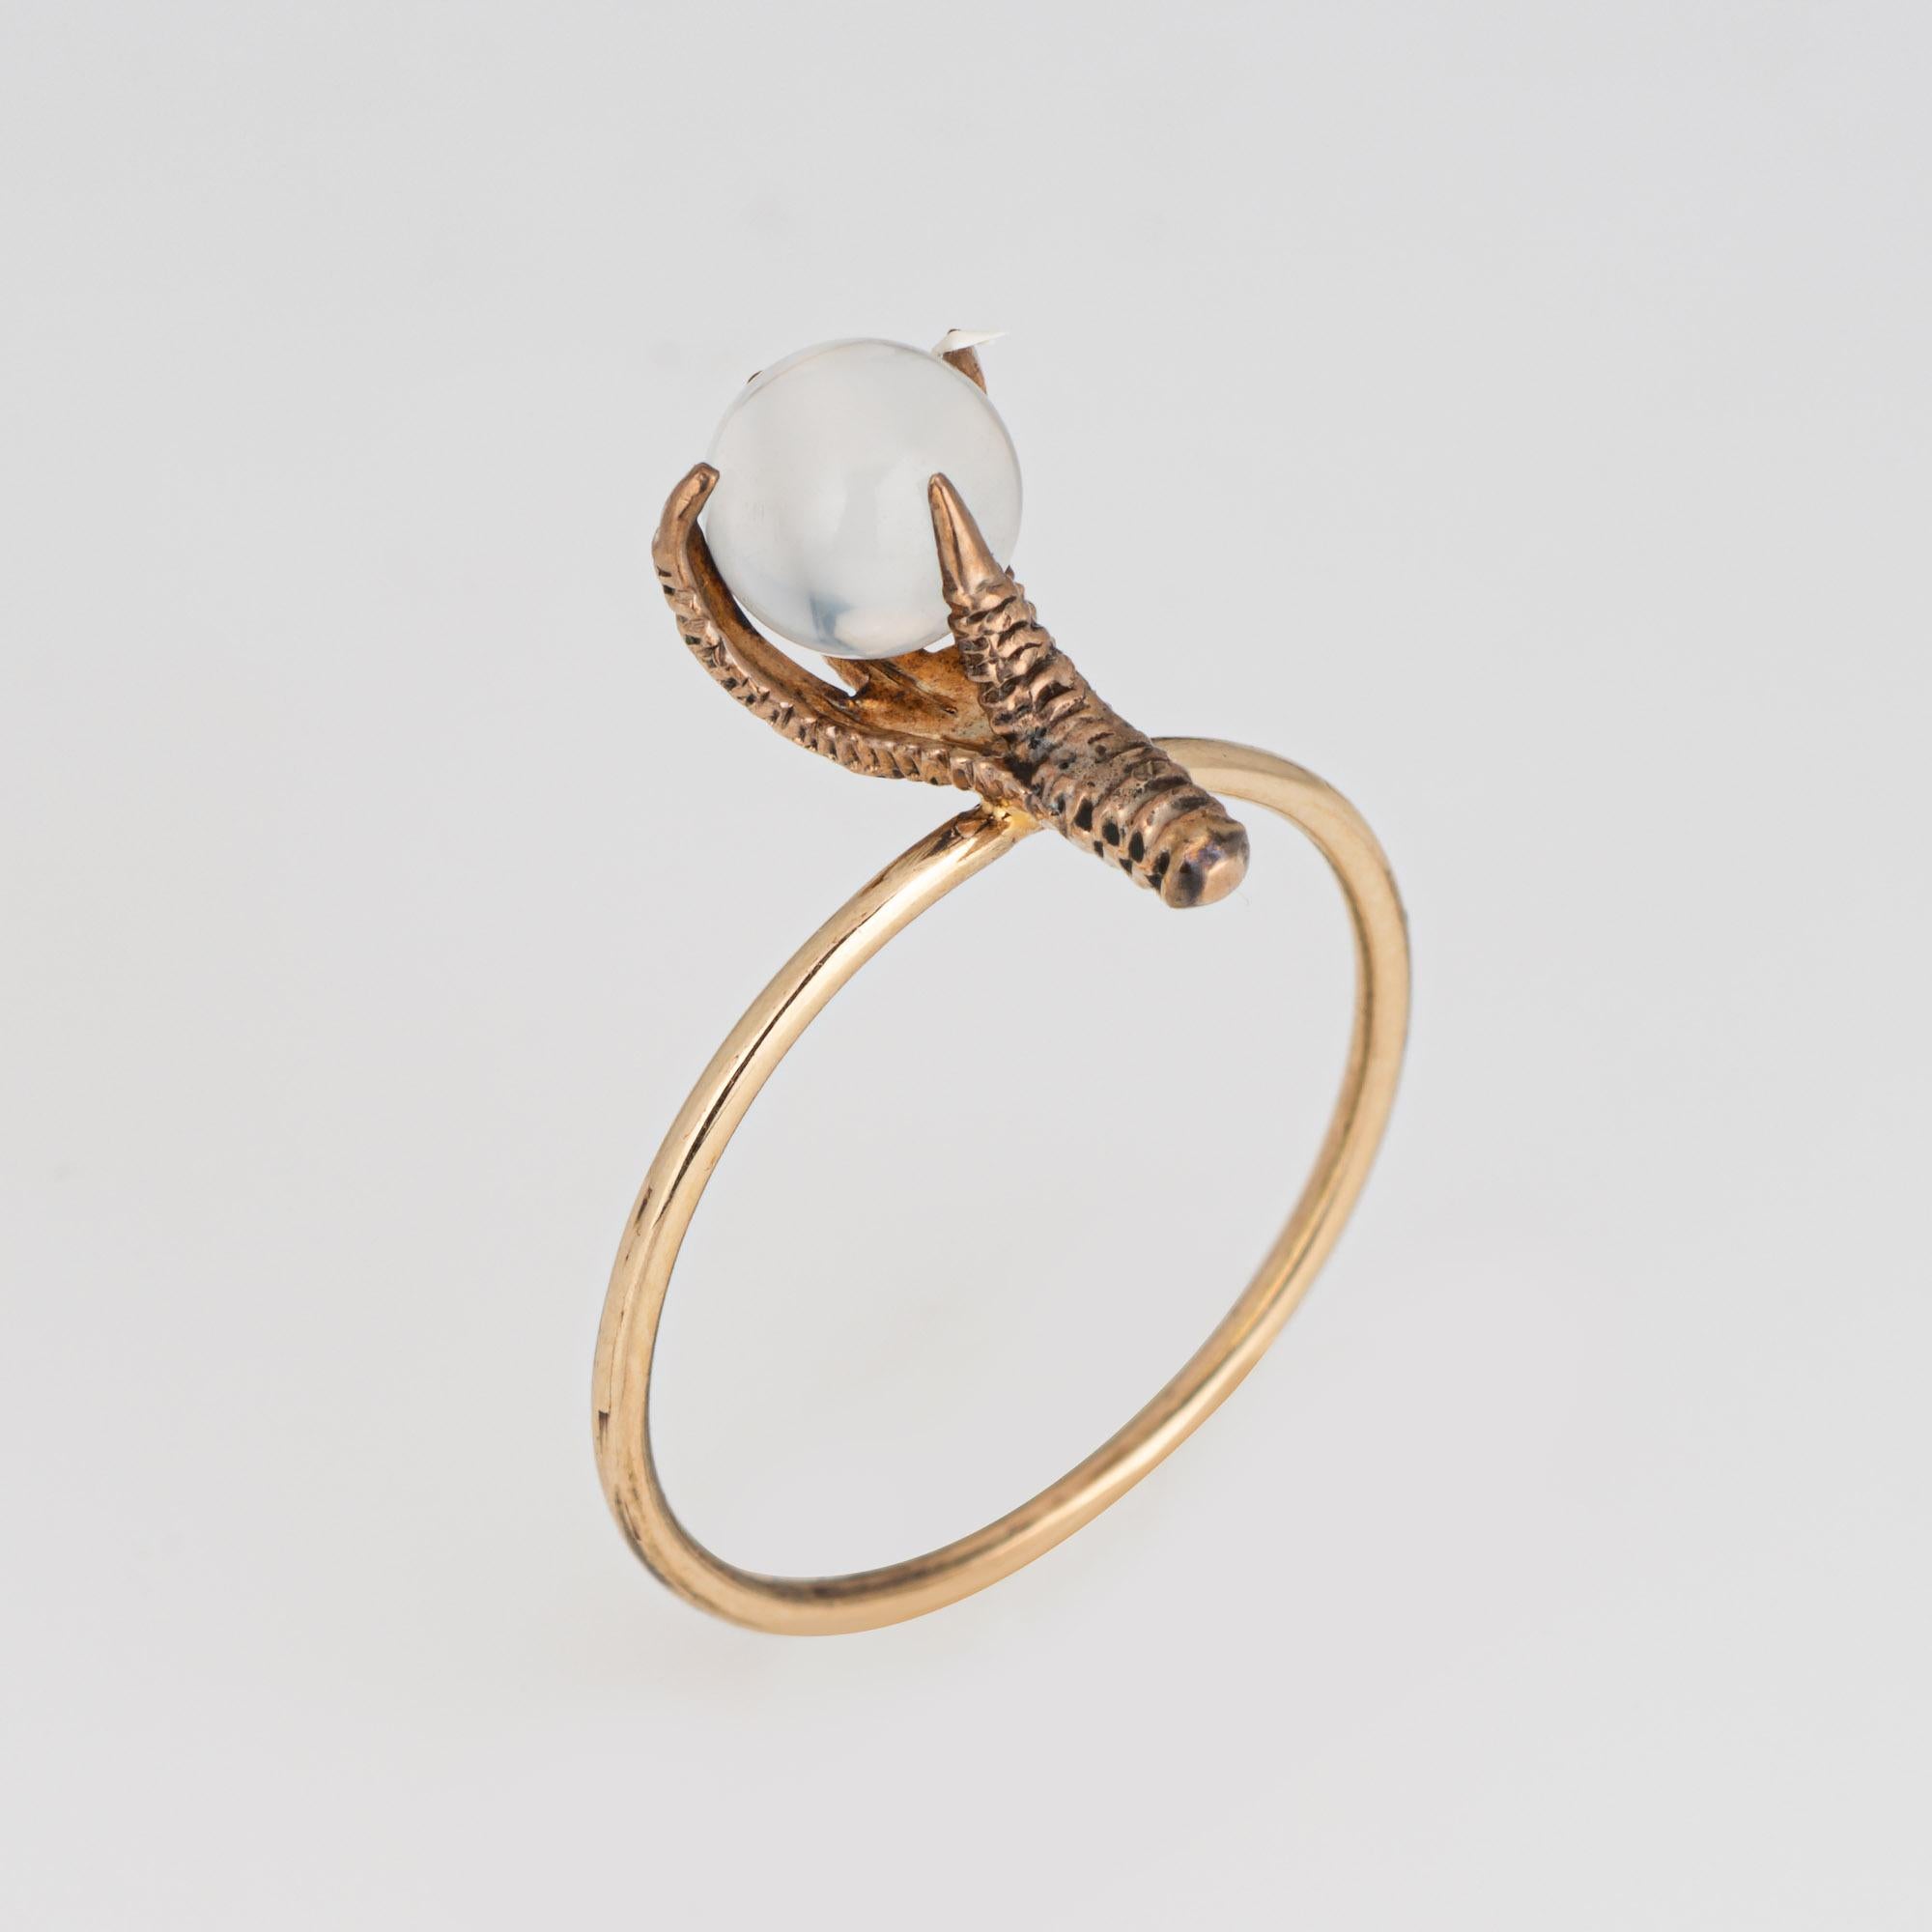 Originally an antique Victorian era stick pin (circa 1880s to 1900s), the moonstone talon ring is crafted in 14 karat rose gold.

The ring is mounted with the original stick pin. Our jeweler rounded the stick pin into a slim band for the finger. The